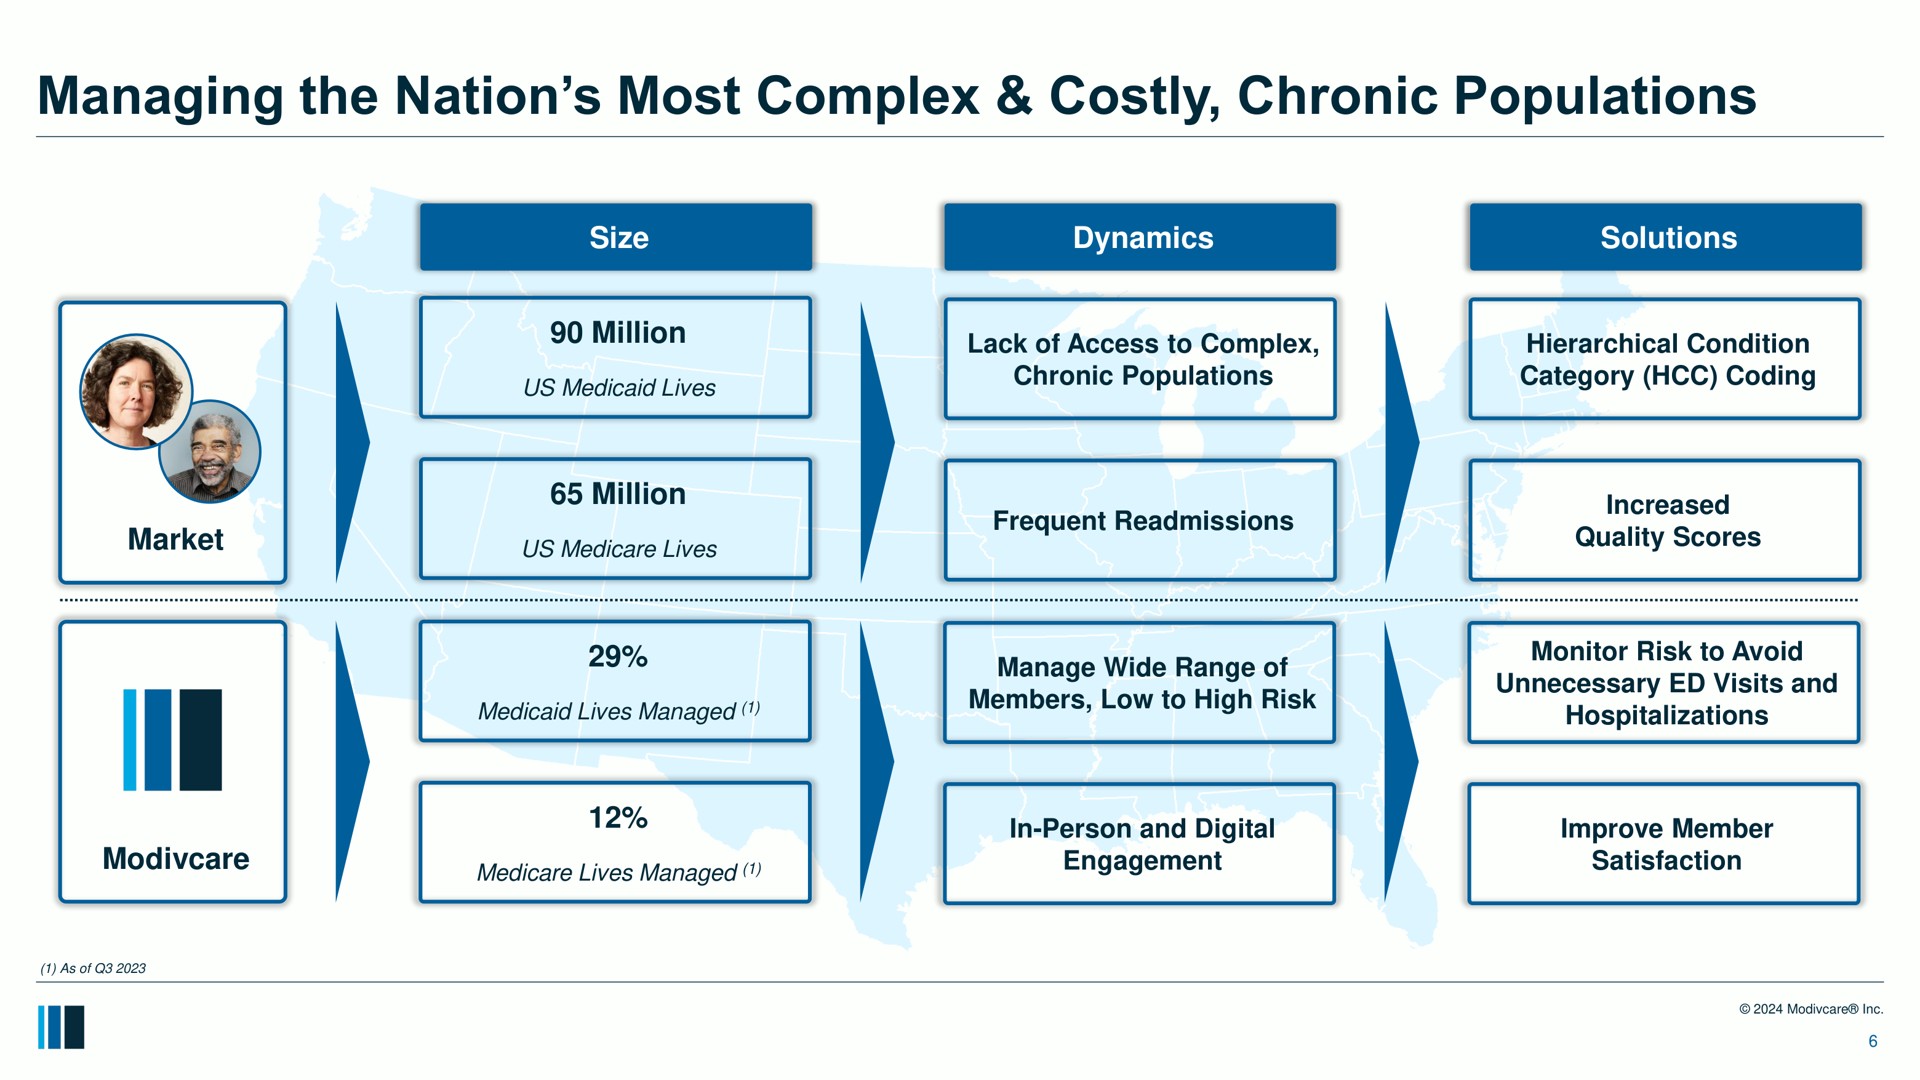 managing the nation most complex costly chronic populations a us lives category coding members low to high risk | ModivCare